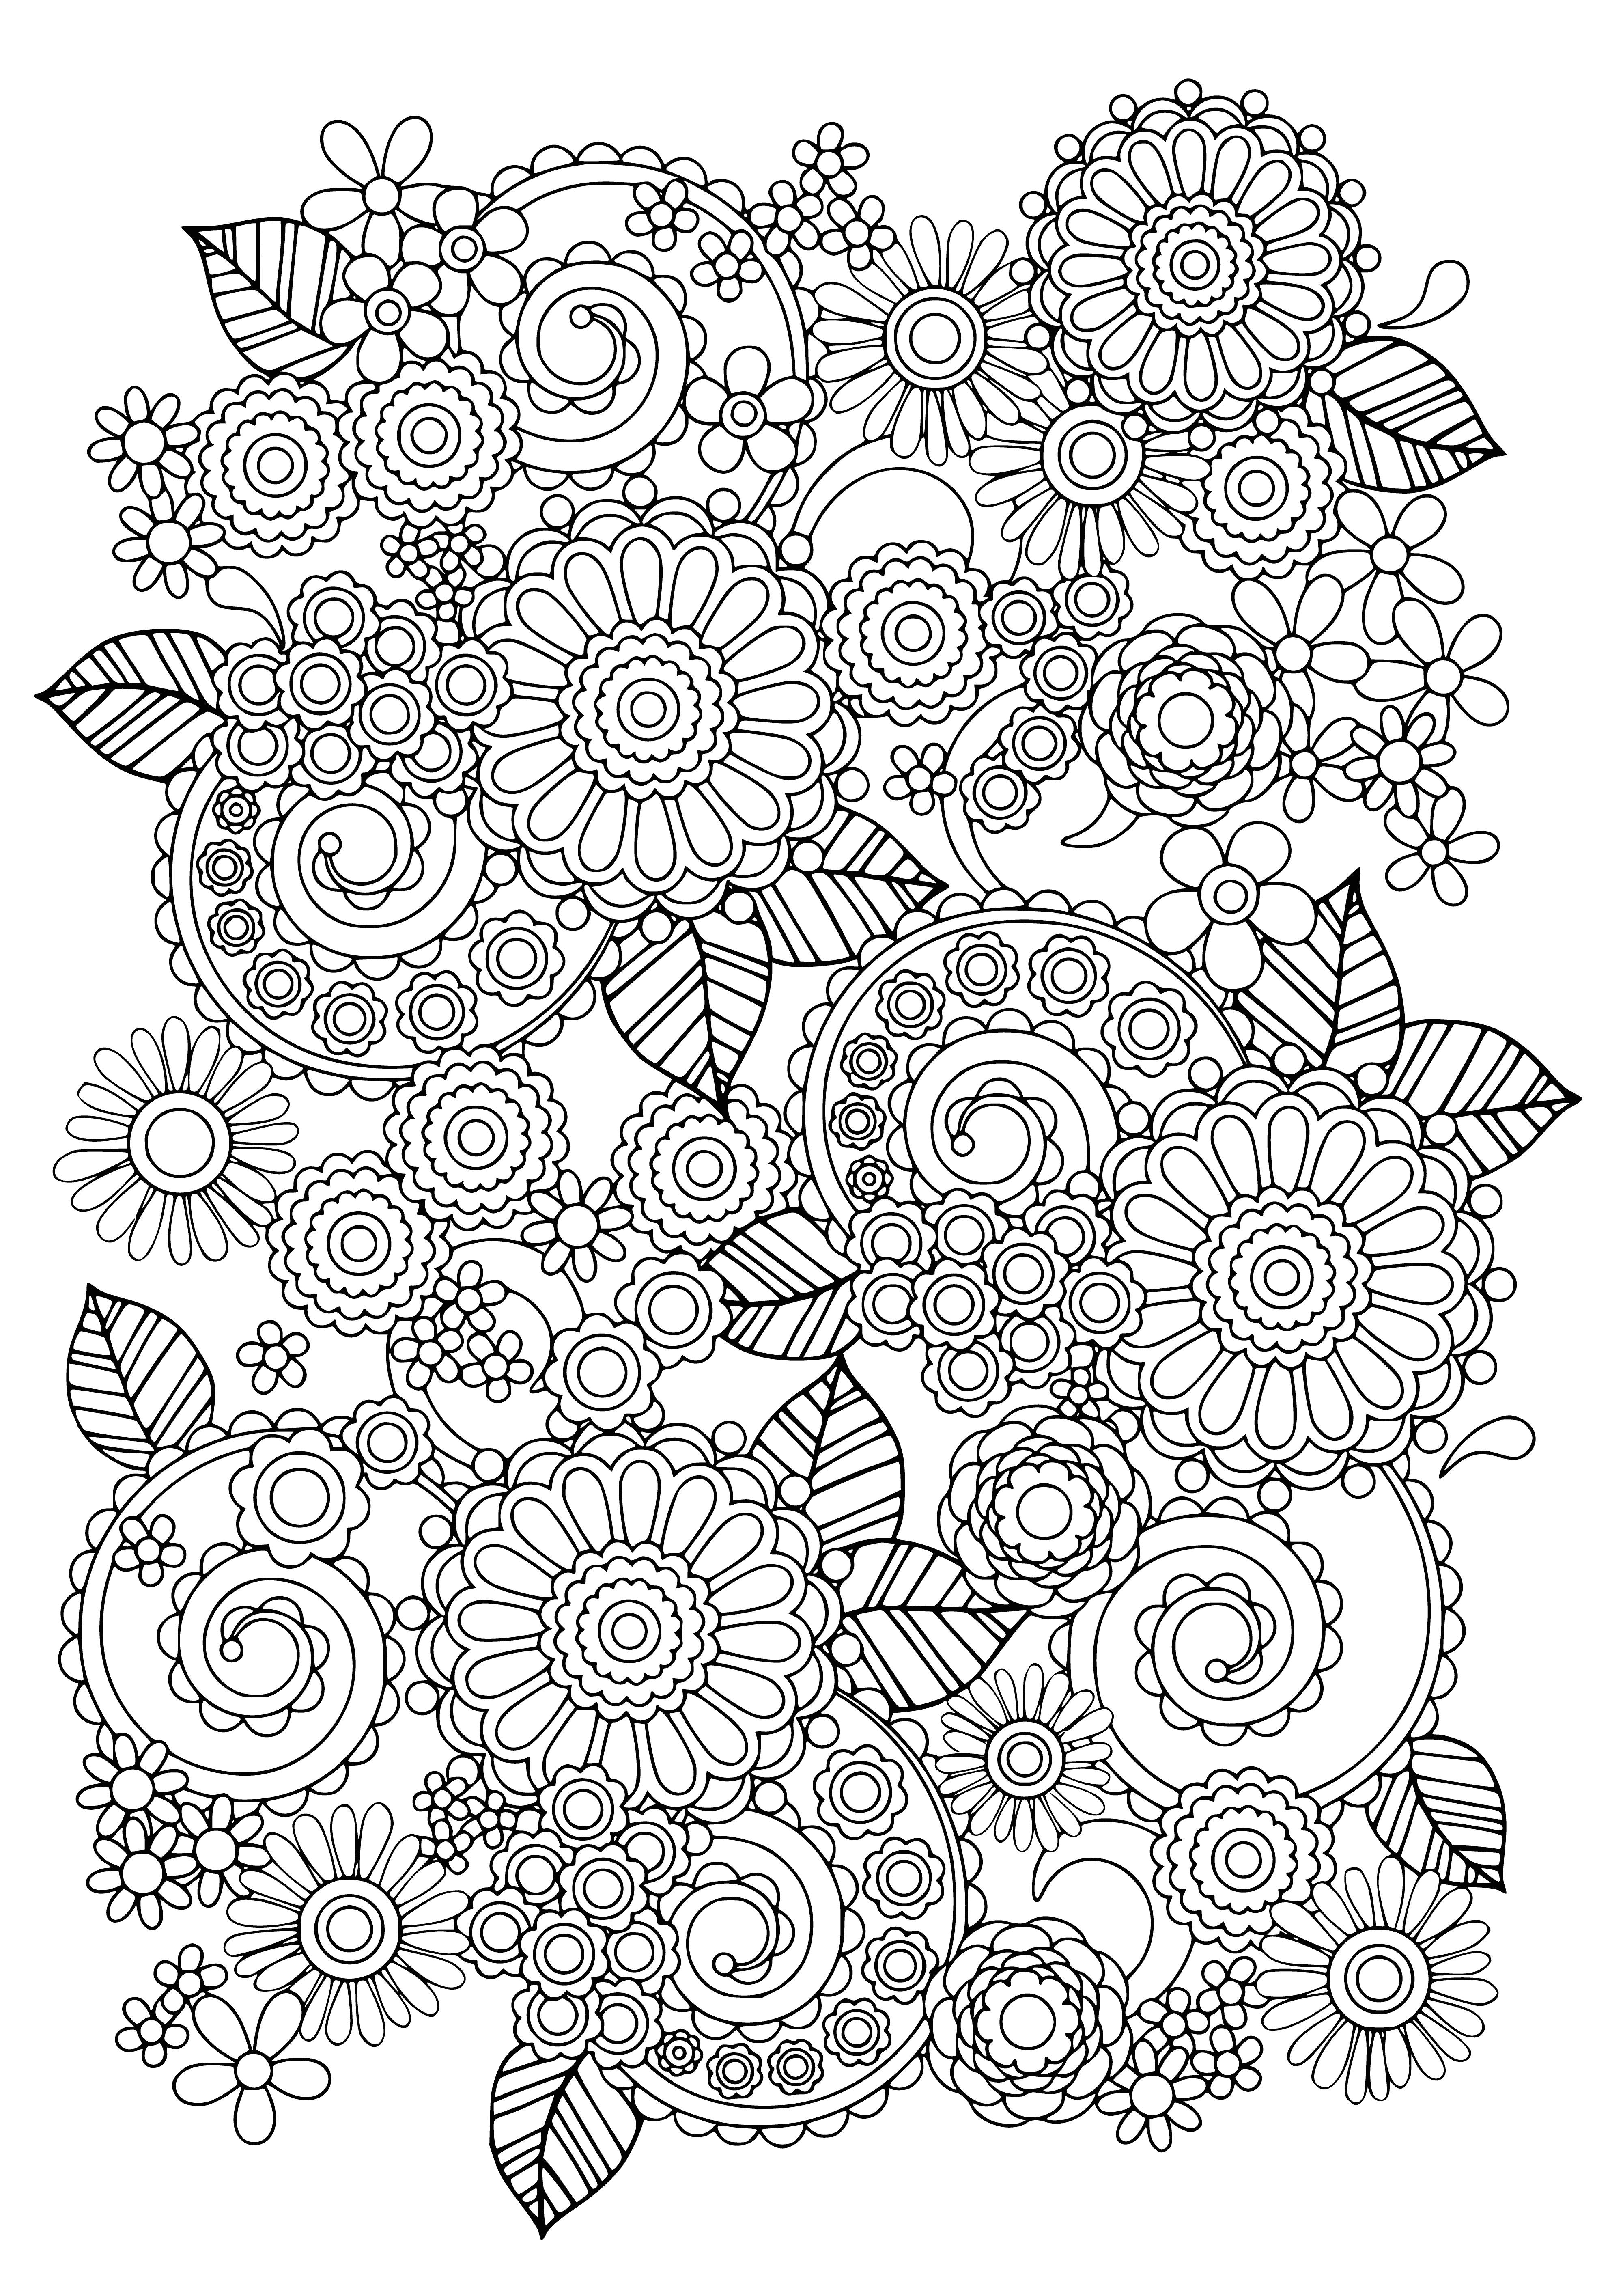 coloring page: Pretty coloring page w/ bright flowers -- big one in center, small ones around it -- looks very relaxing!